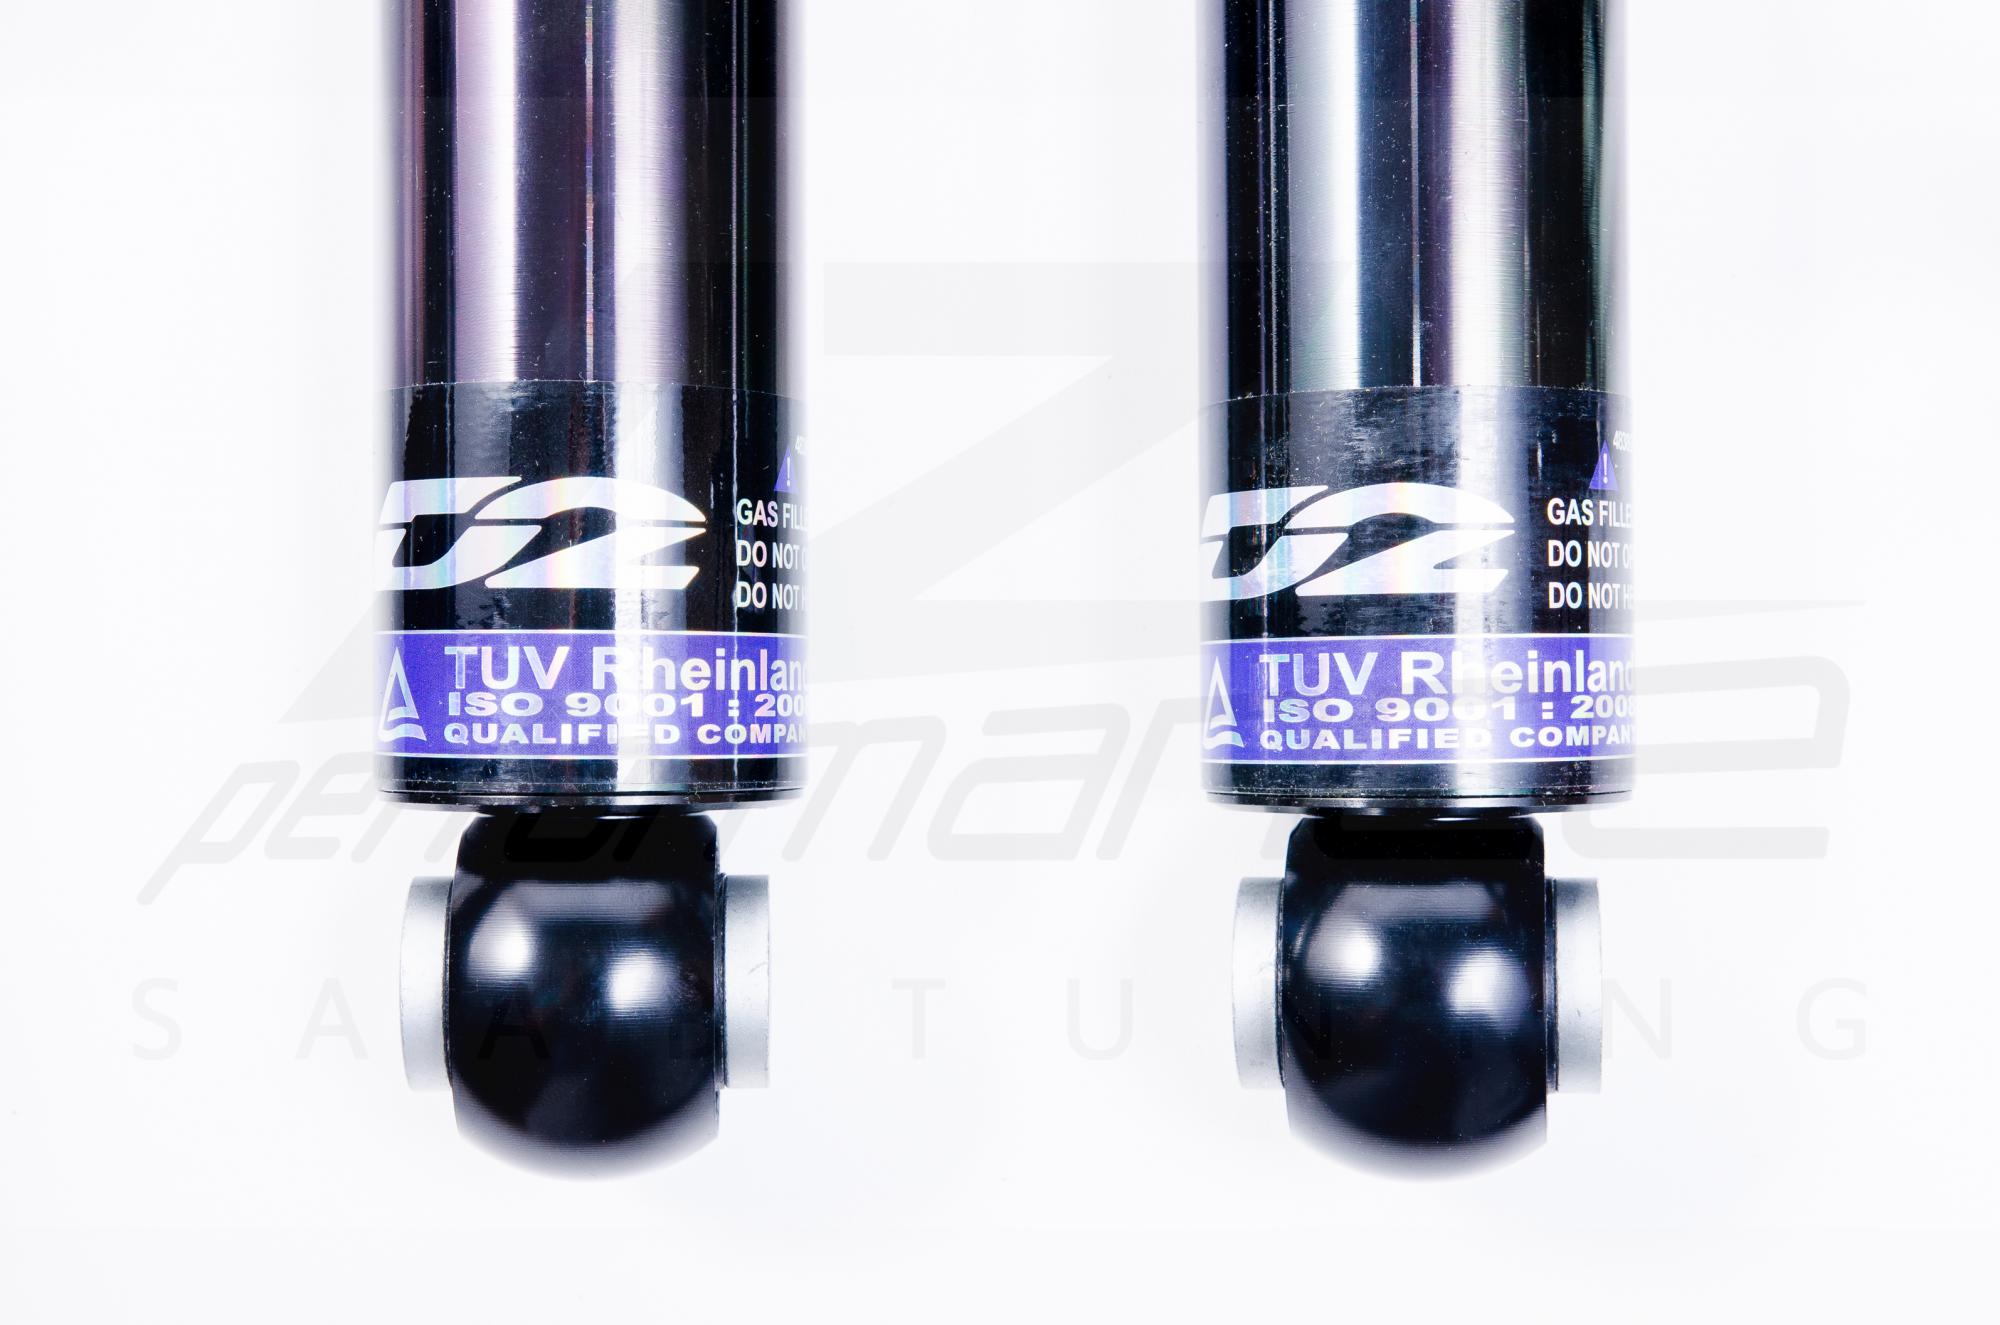 D2 Racing Street Coilover Suspension Kit, BMW E36 1990-1998